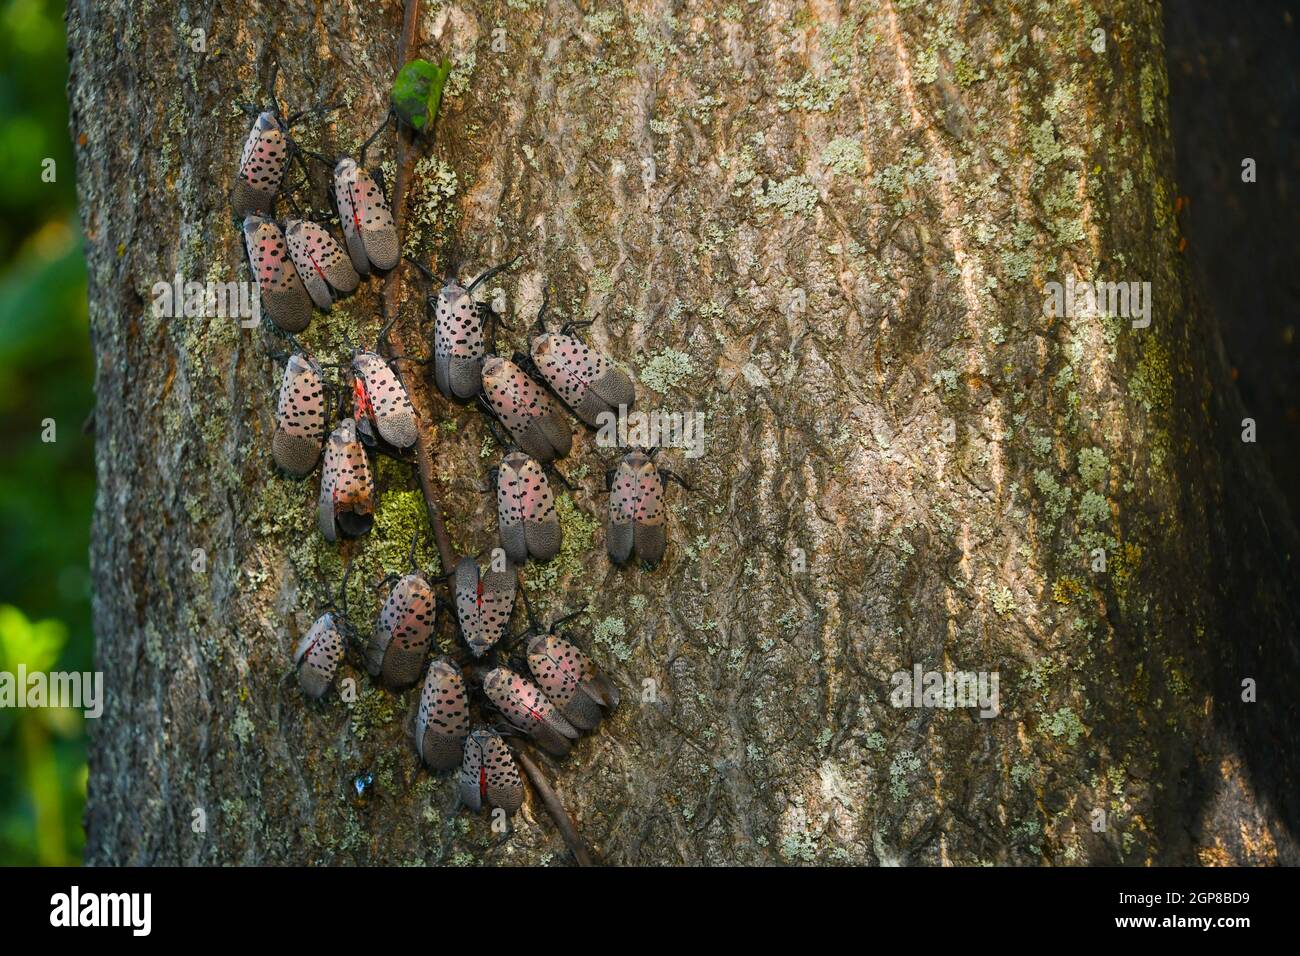 Invasive Spotted Lanternflies attack a Tree of Heaven, killing it in the process. Stock Photo